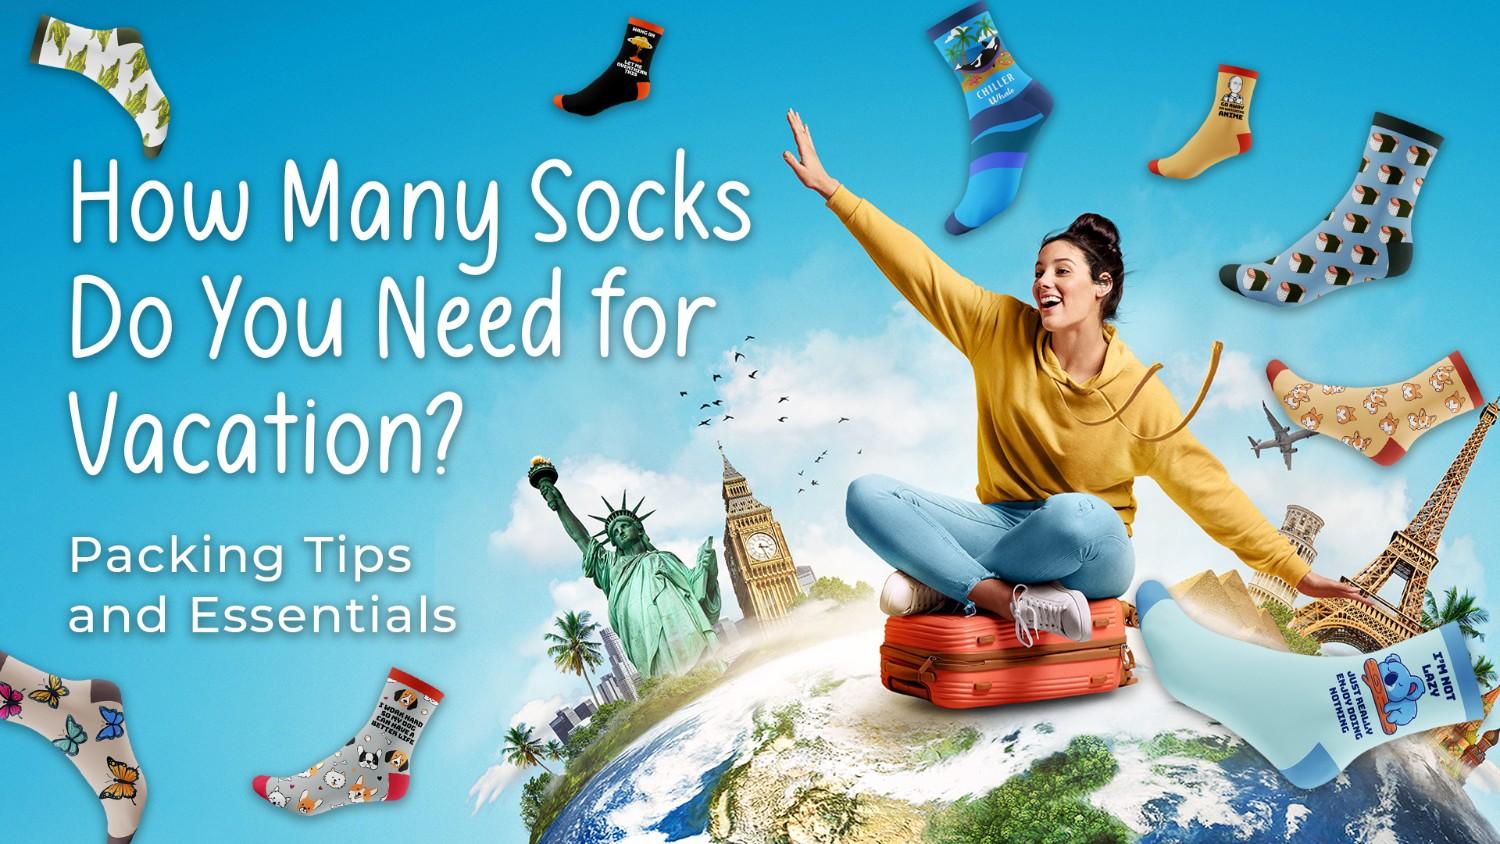 How Many Socks Do You Need for Vacation Packing Tips and Essentials